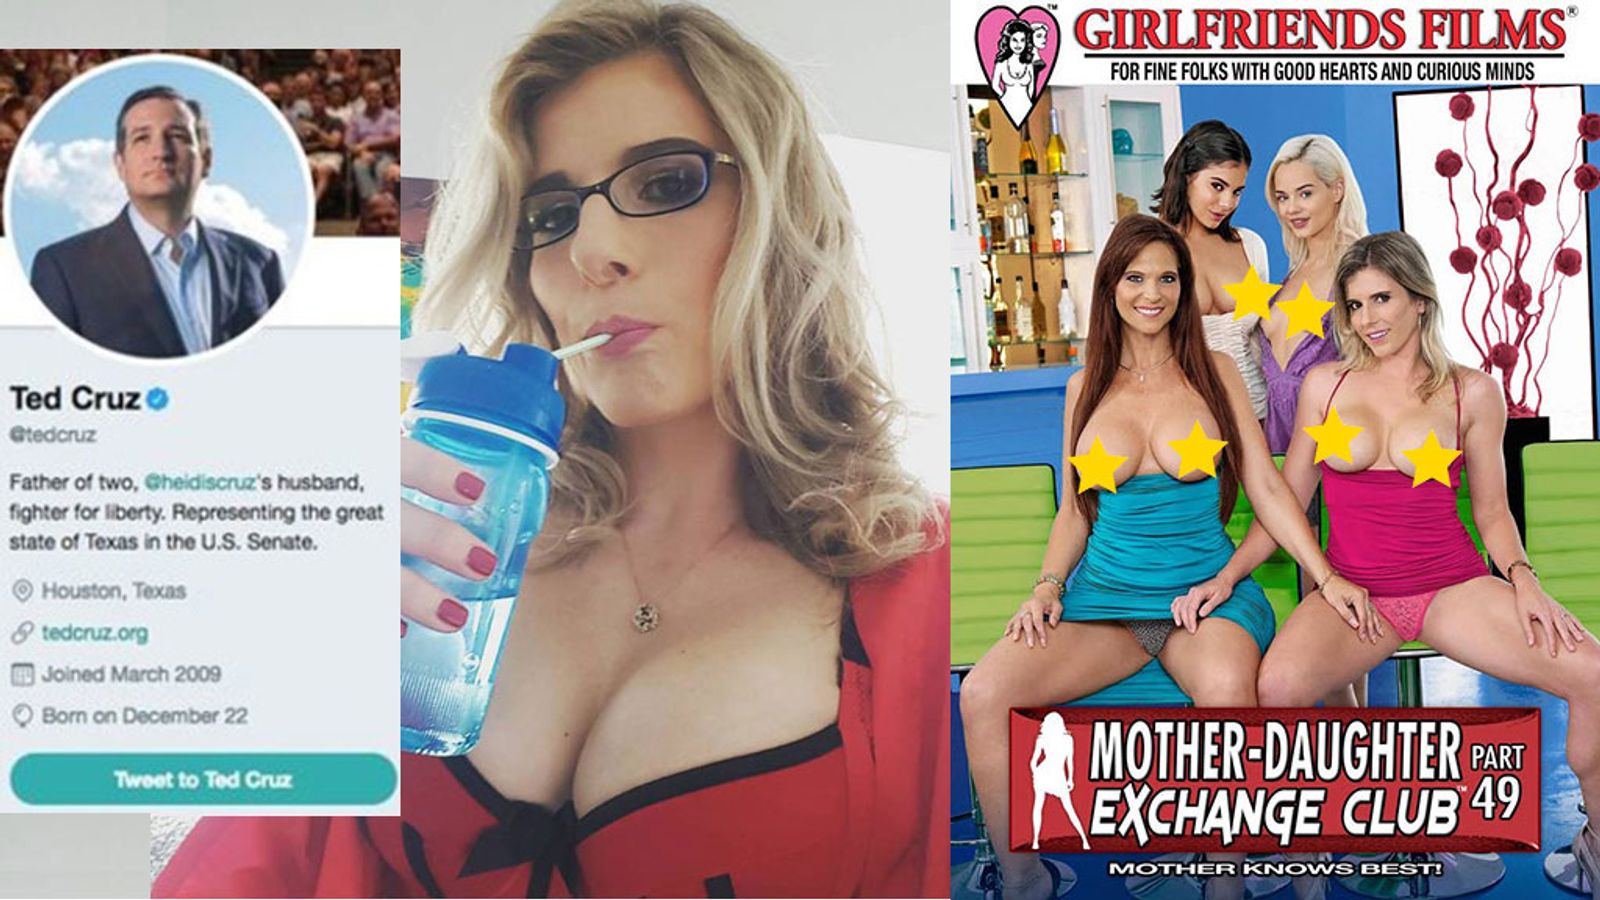 Old & Young Get It On In ‘Mother Daughter Exchange Club 49’